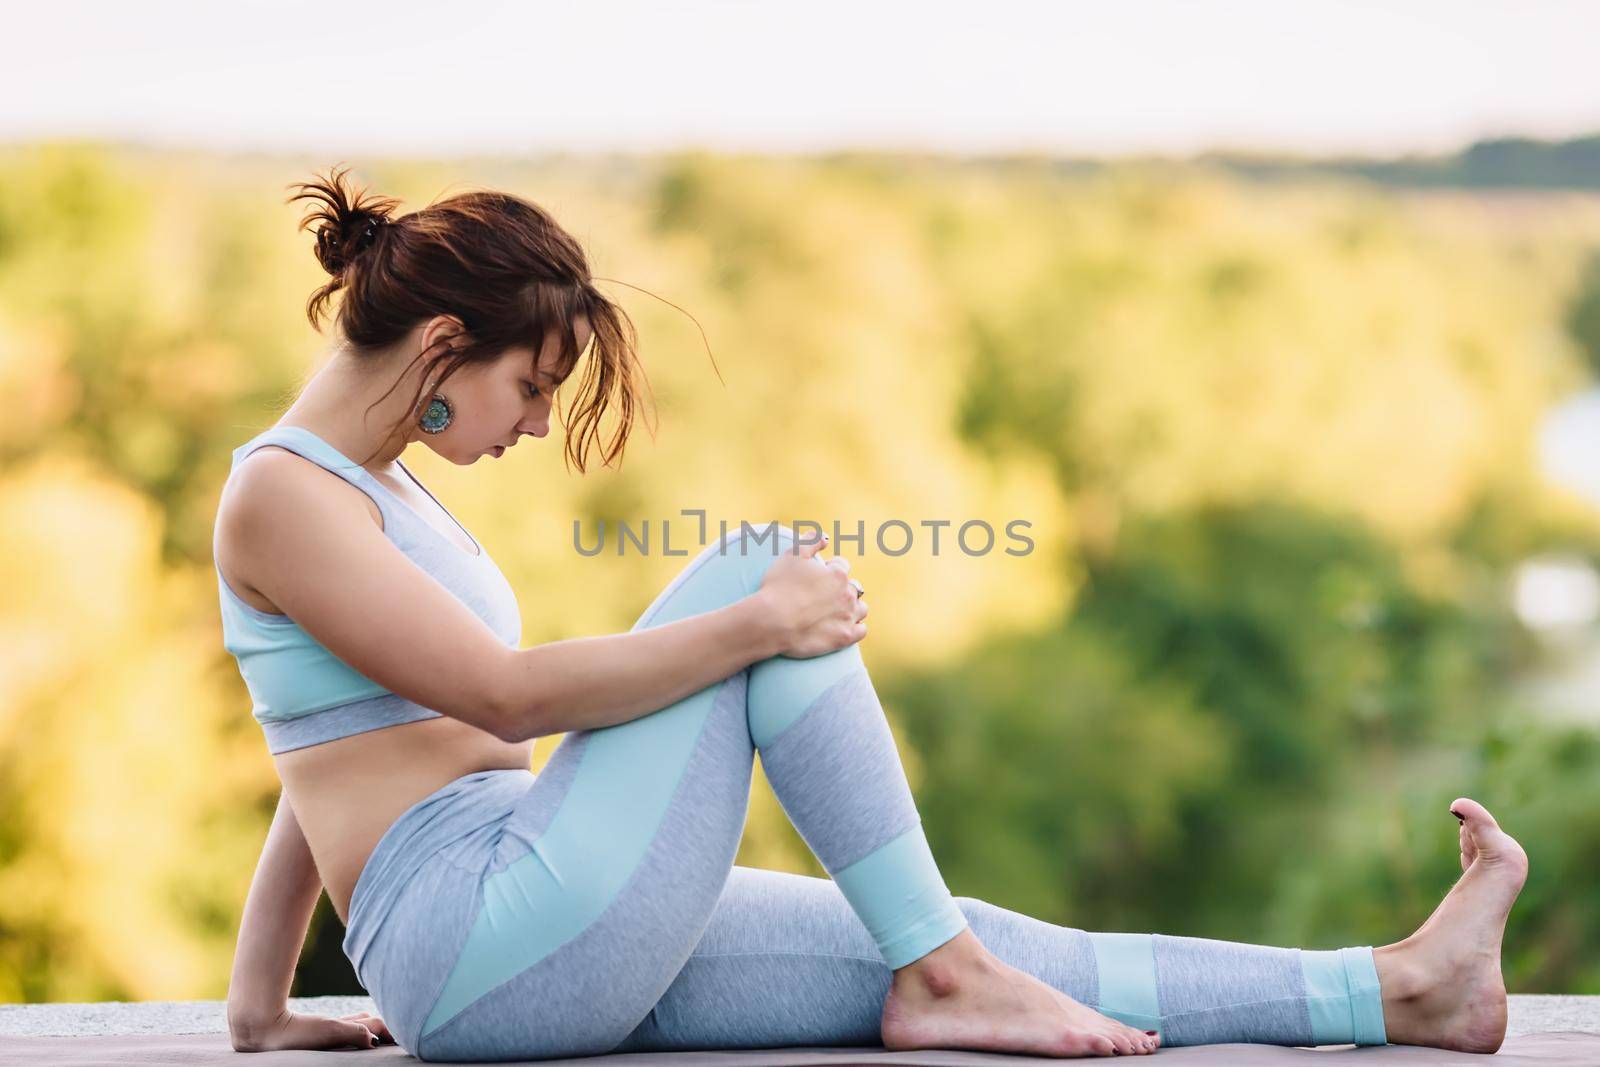 Pretty woman doing yoga exercises in the park on blurry background